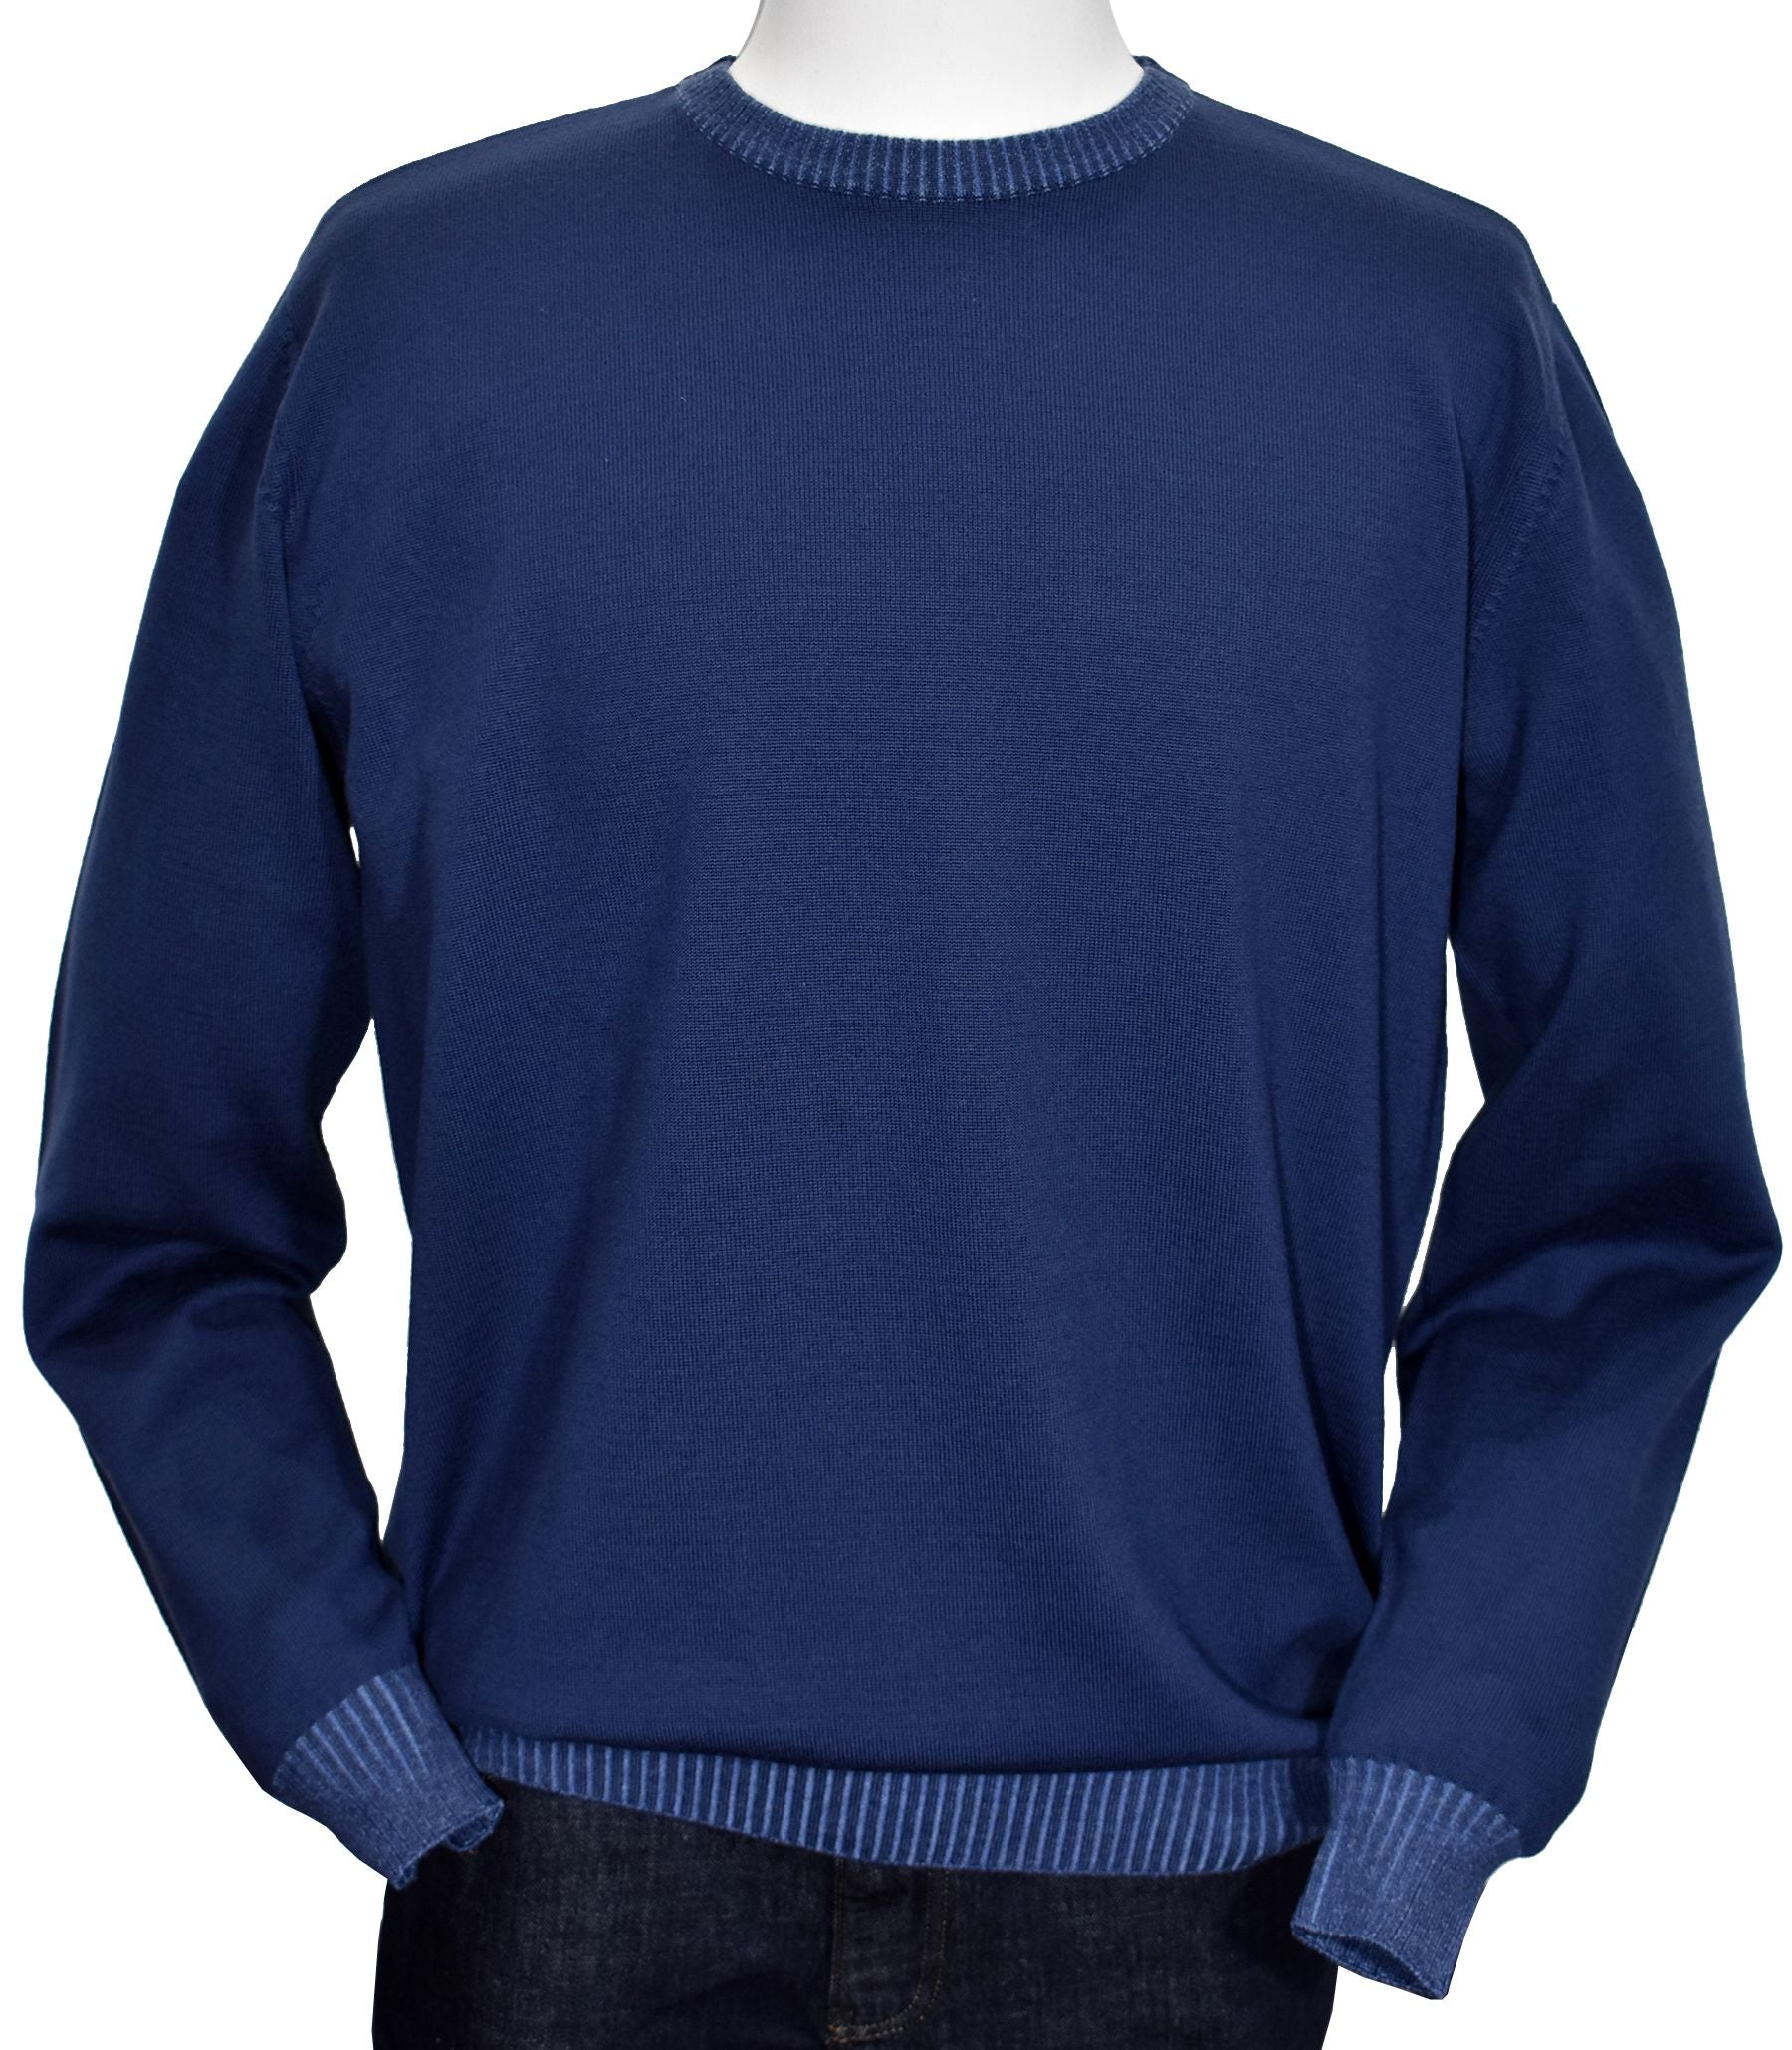 Soft, clean, classic with a touch of fashion best describes this Italian merino wool blended knit sweater.  The light weight and fine stitch work, coupled with accent edges, produces as style that works in any setting and year round.   Enhanced rib detailing with contrast shading.  Classic fit. By Marcello Sport.